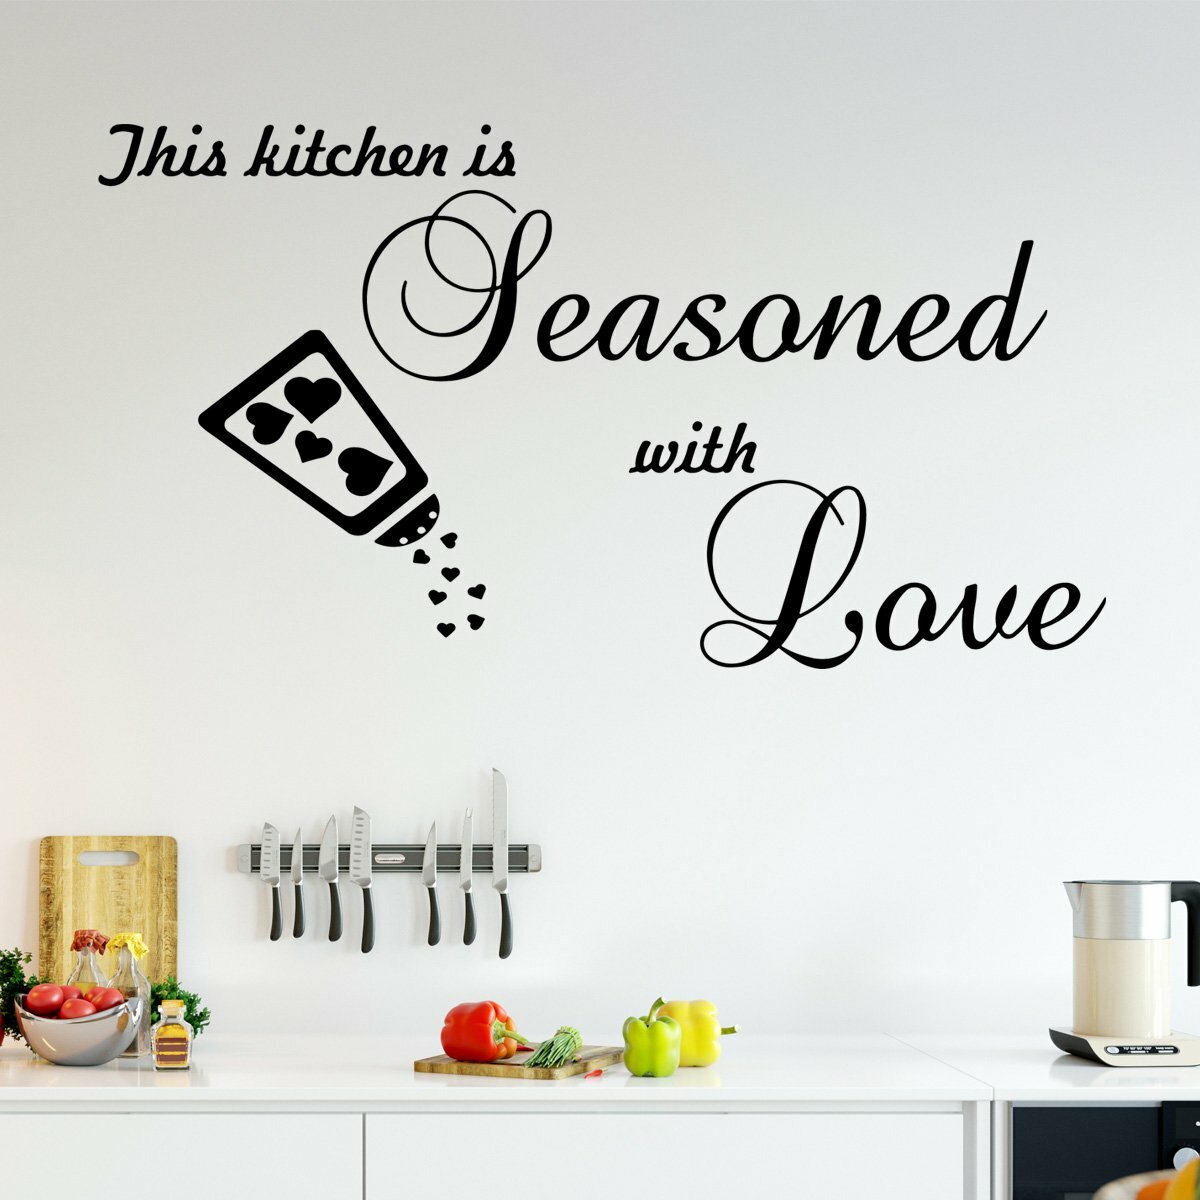 This kitchen is seasoned with love Wall Sticker Removable Vinyl Decal Art Quote